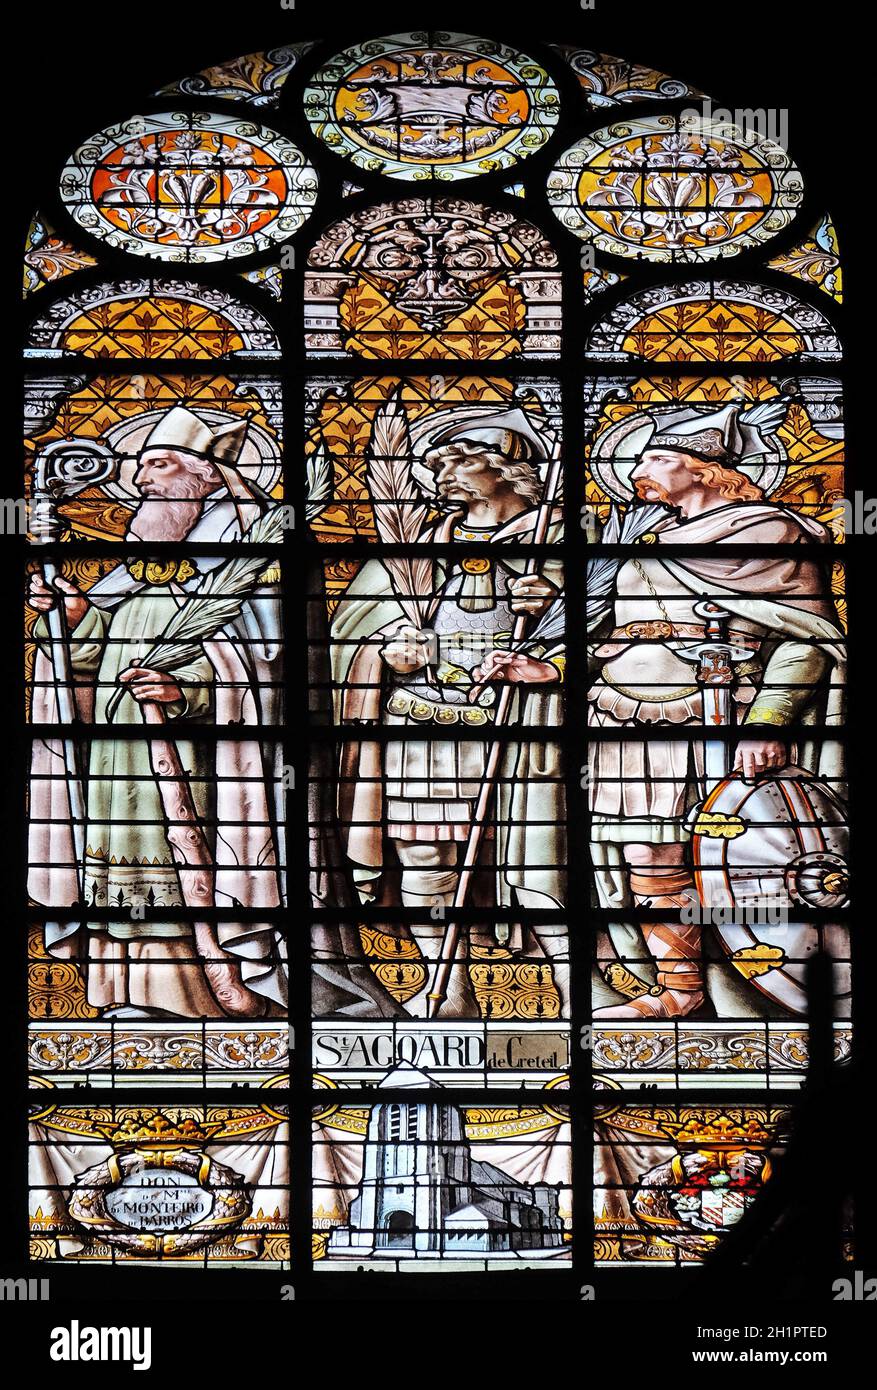 Saint Agoard of Creteil, stained glass window in the Saint Augustine church in Paris, France Stock Photo